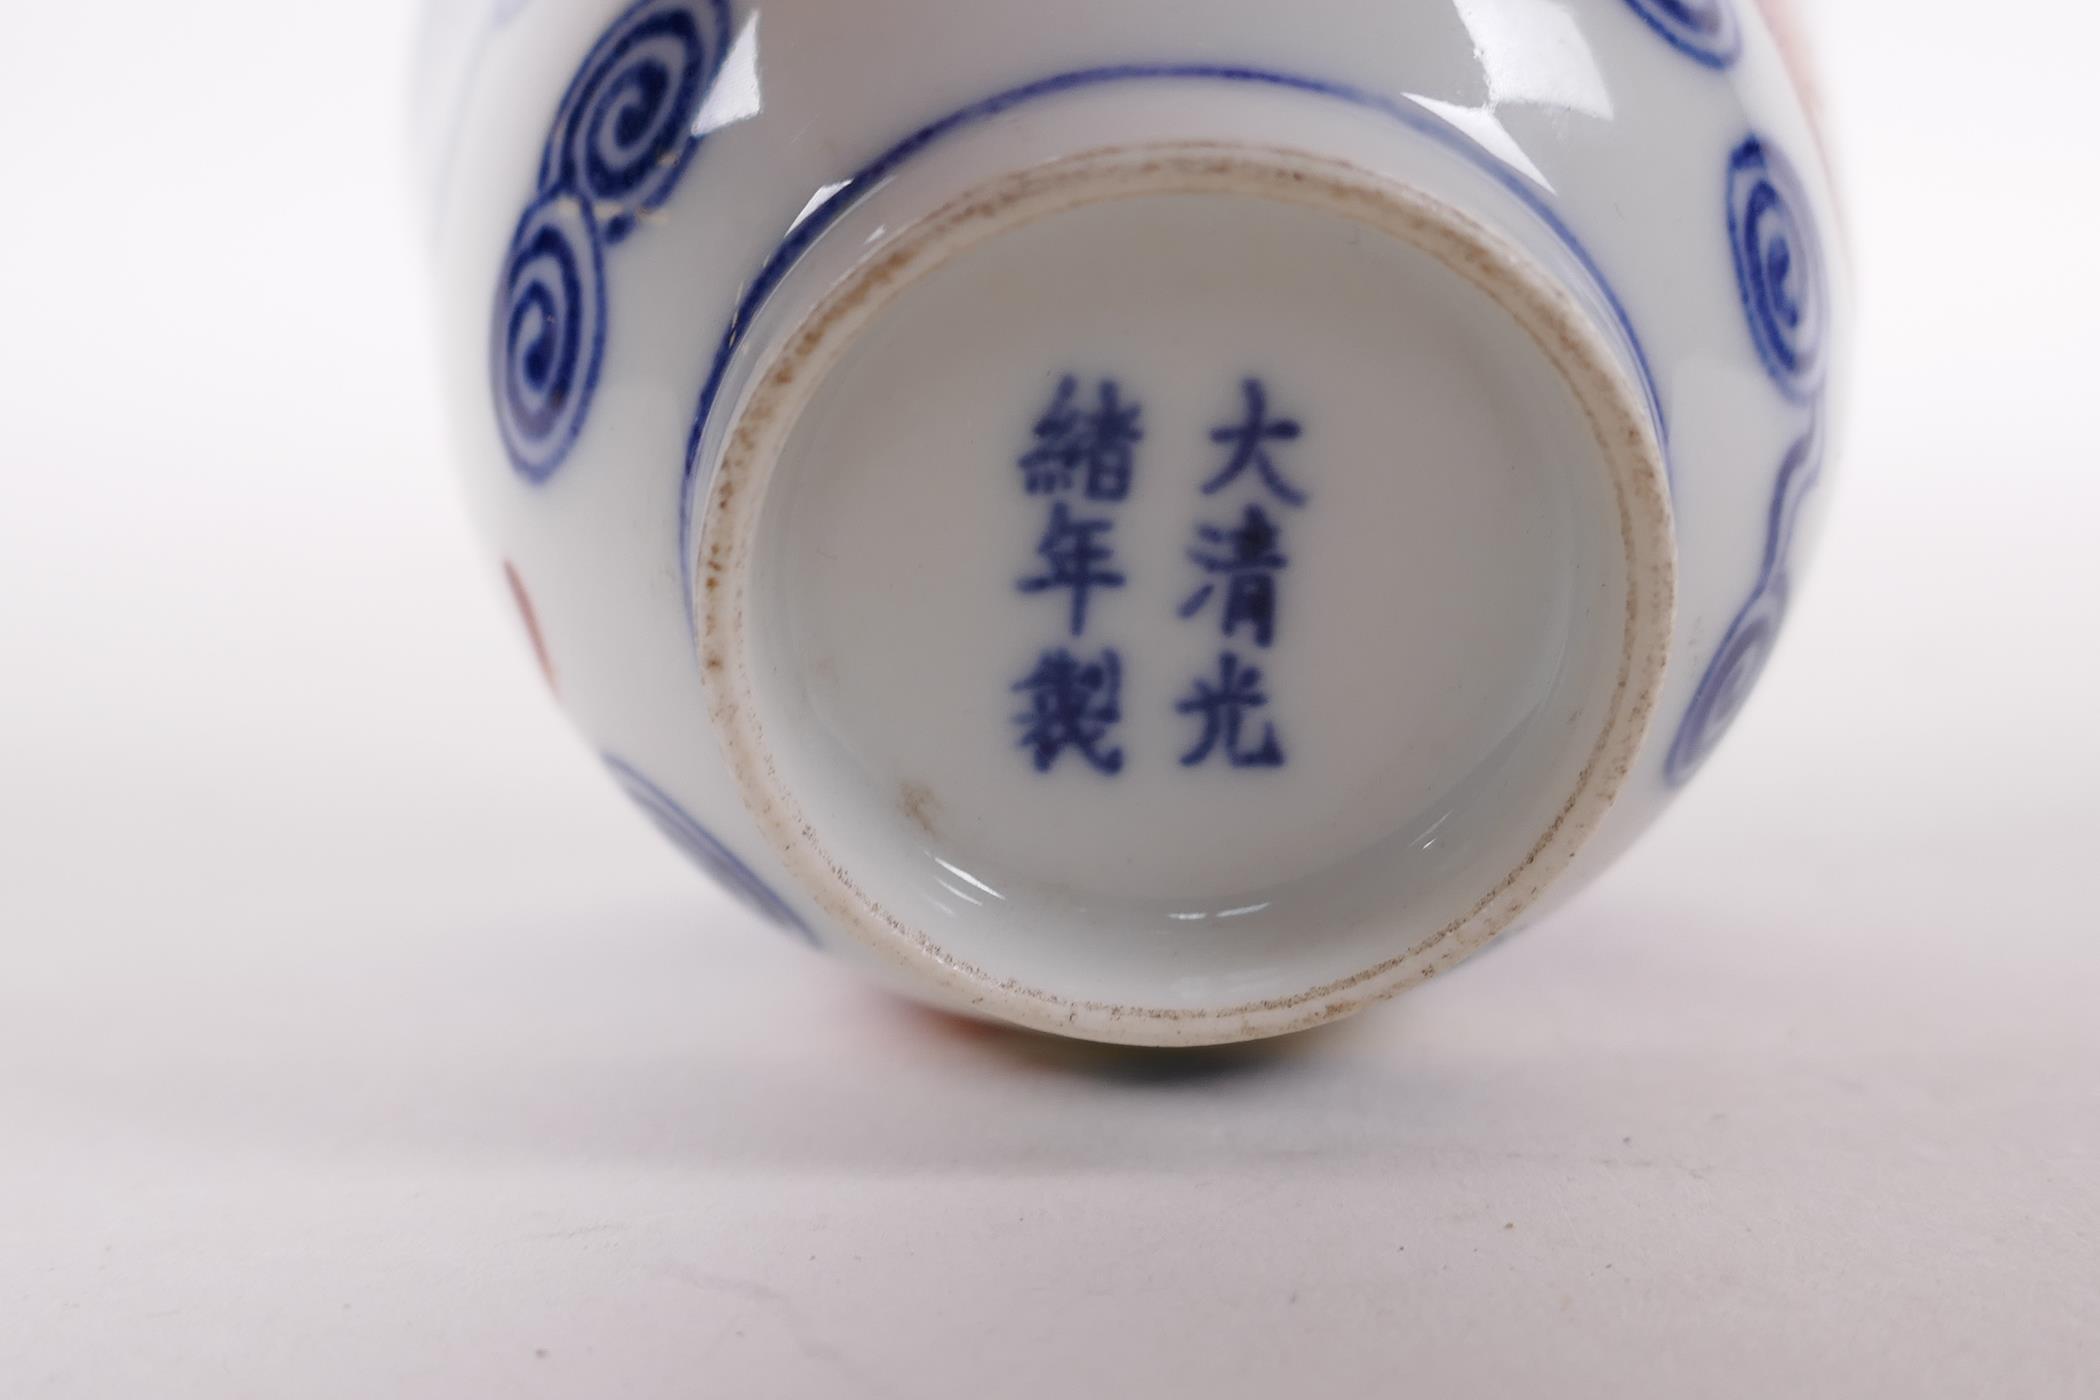 A Chinese blue and white porcelain tea bowl with iron red bat decoration, Quing six character mark - Image 4 of 5